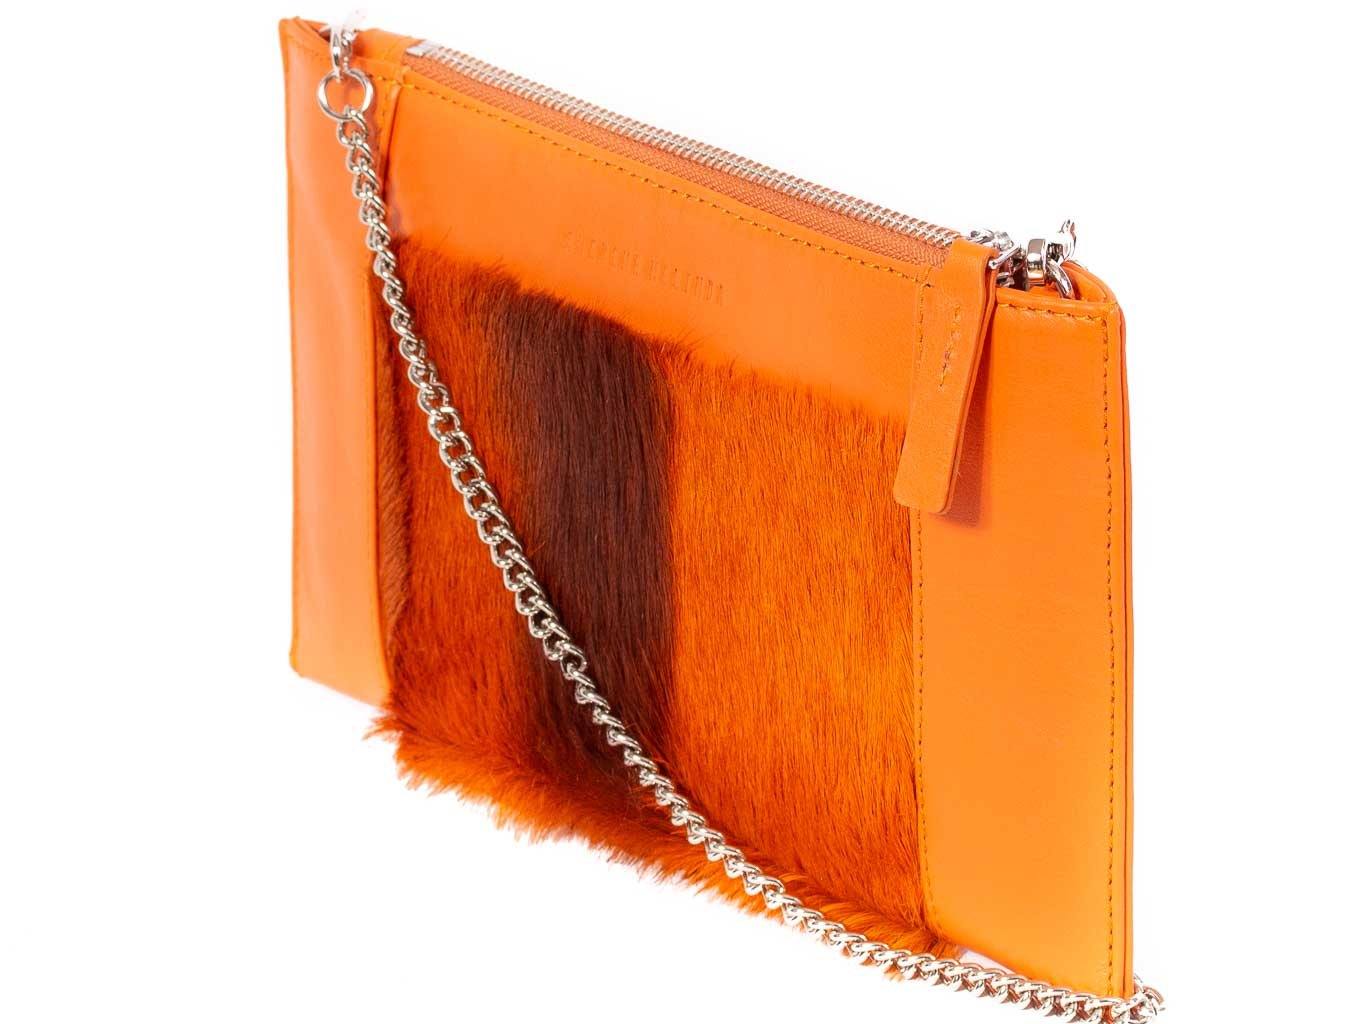 Clutch Springbok Handbag in Orange with a stripe feature by Sherene Melinda front strap